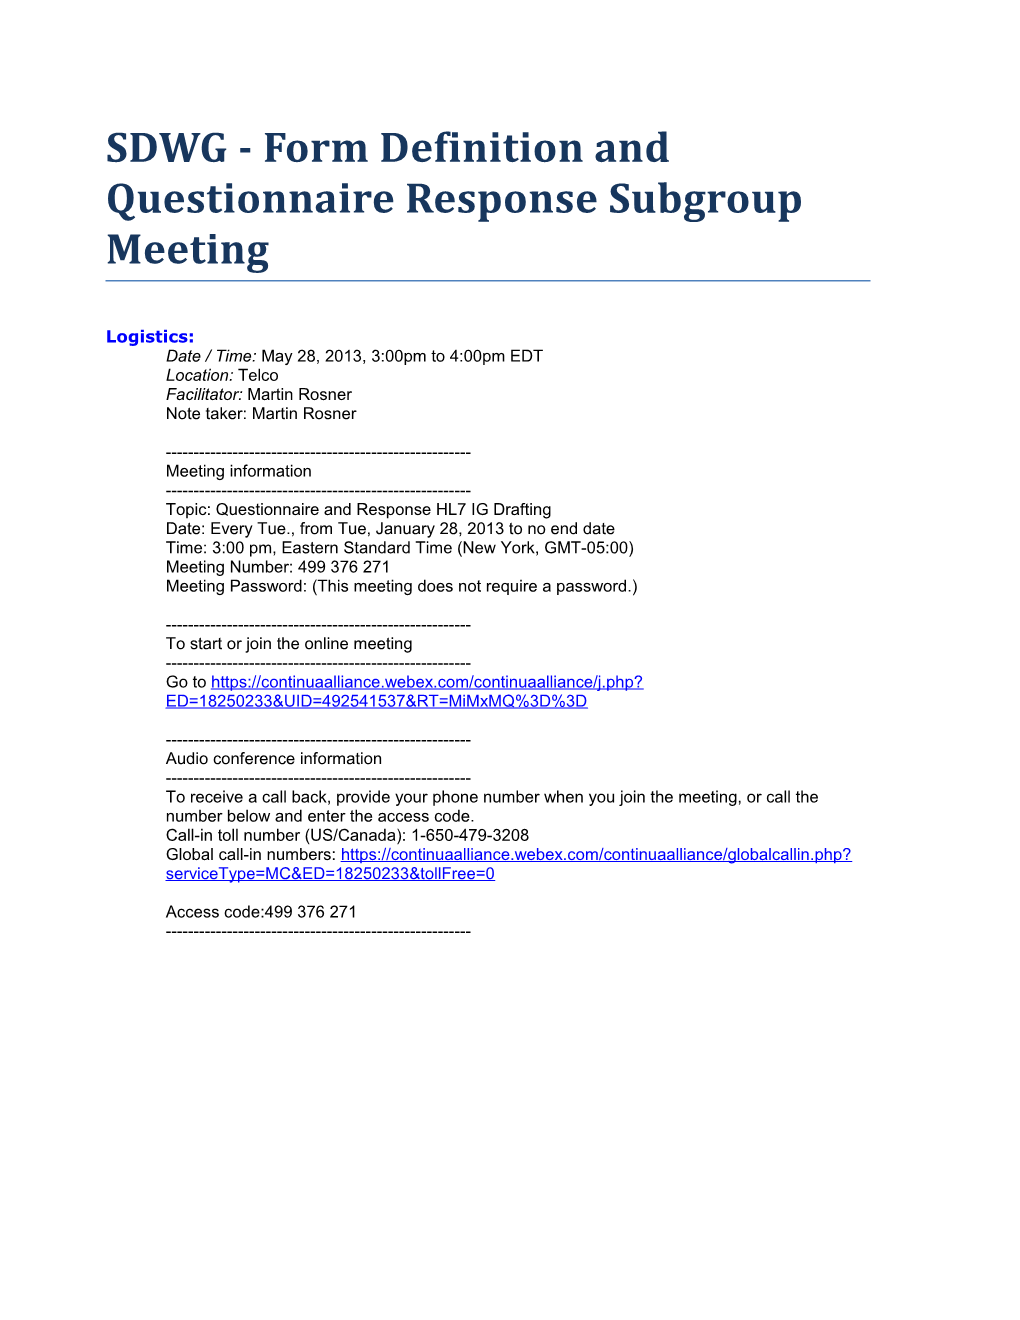 SDWG - Form Definition and Questionnaire Response Subgroup Meeting